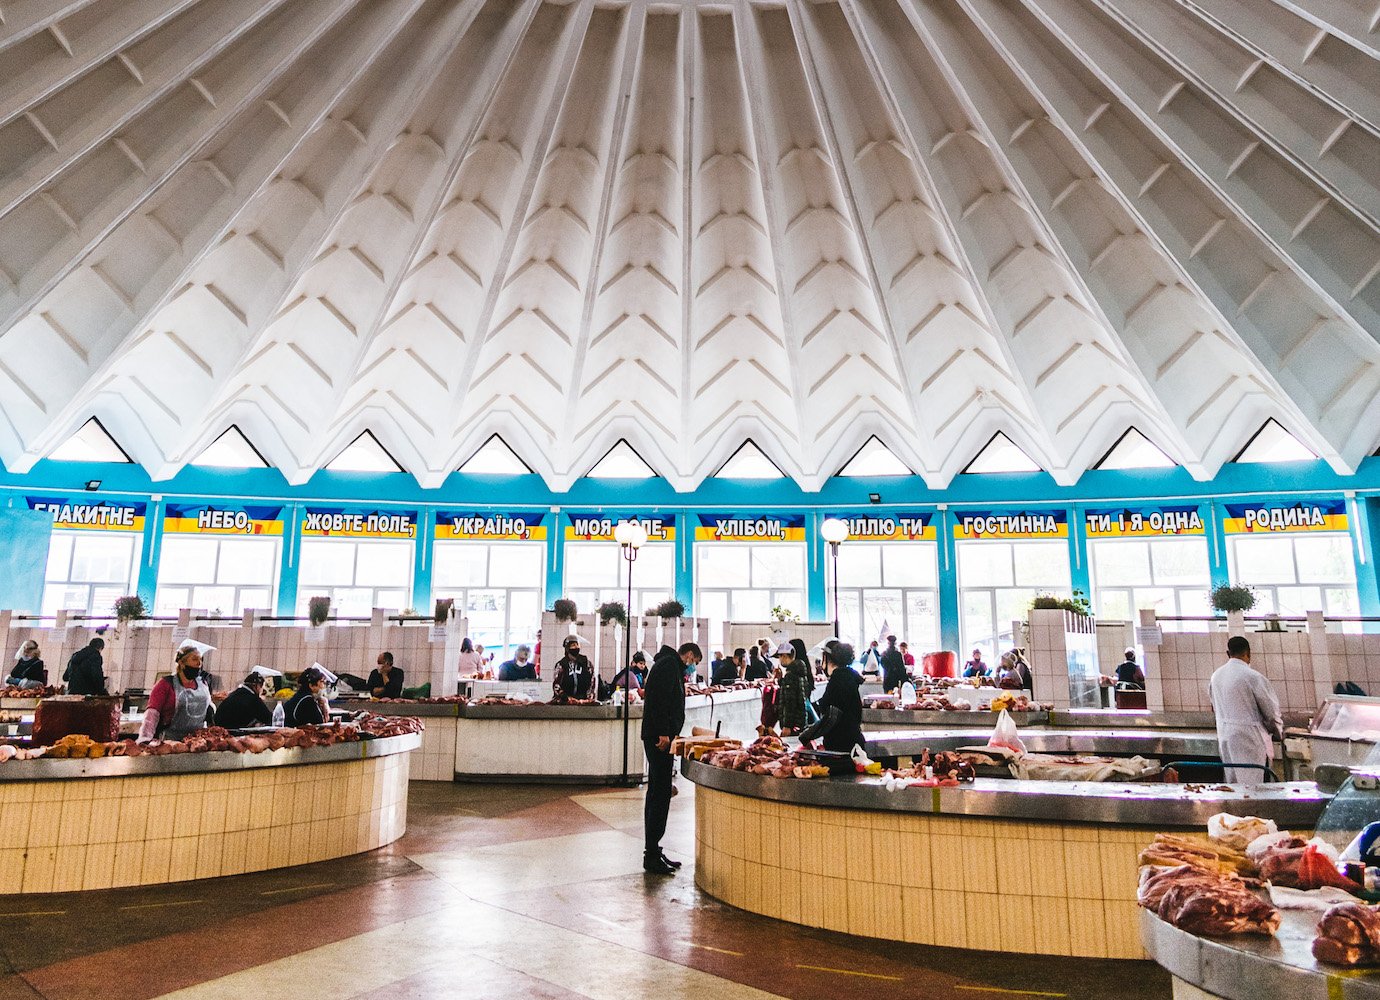 Join the Instagram account fighting to save Ukraine’s modernist heritage